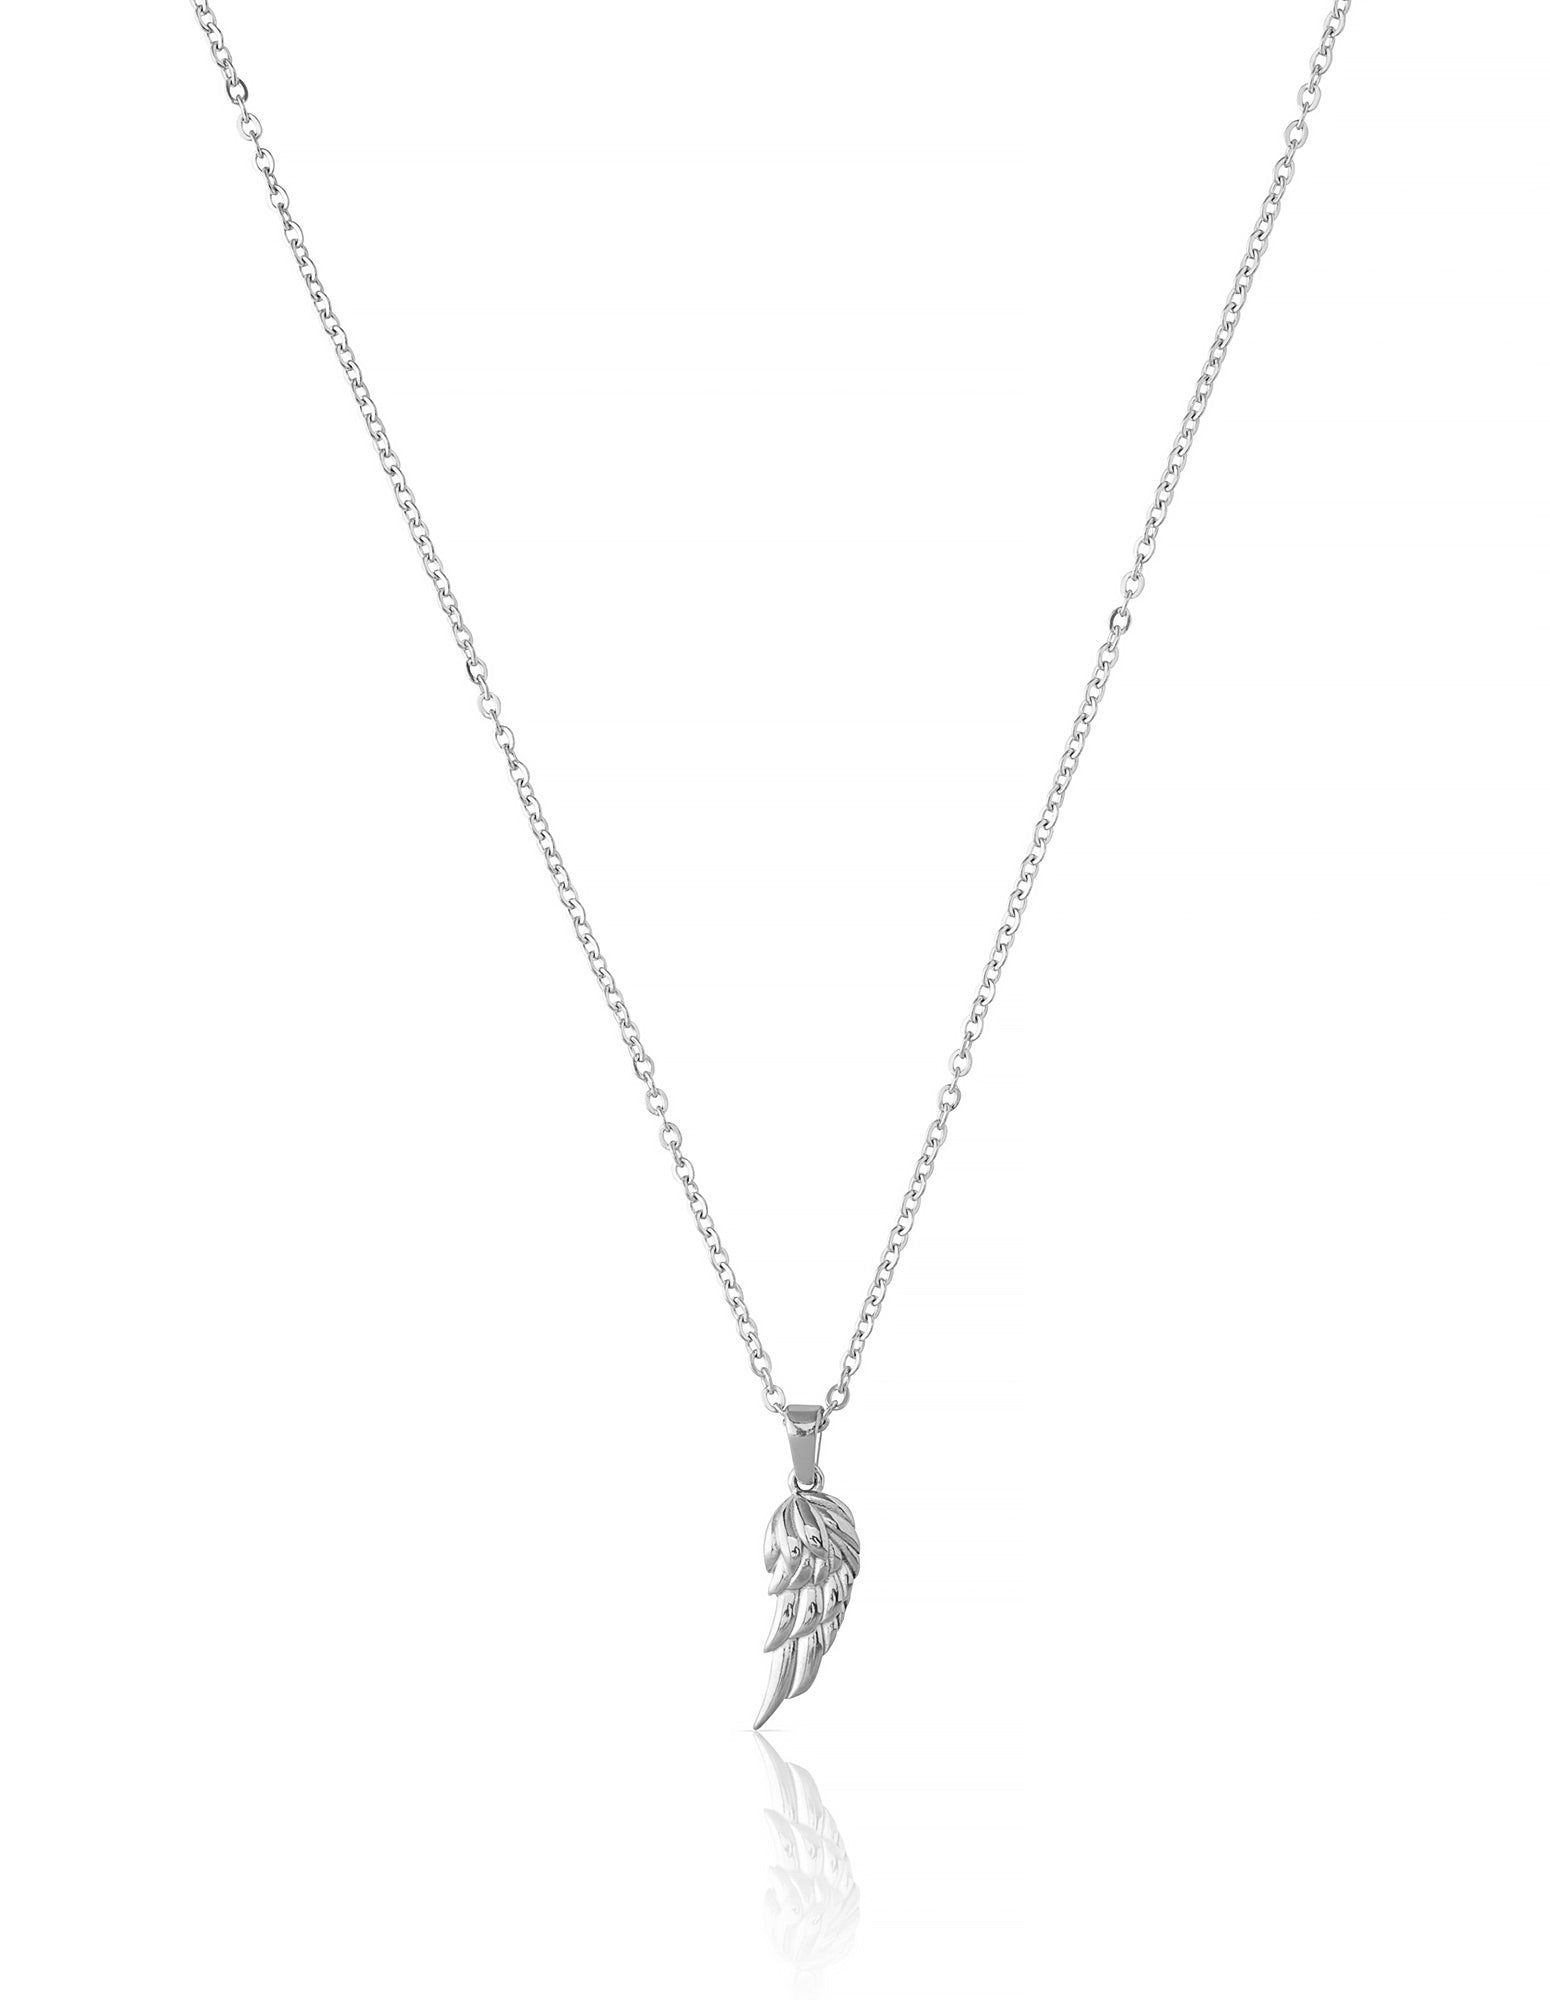 Stainless Steel Angel Wing Pendant and Chain for Men